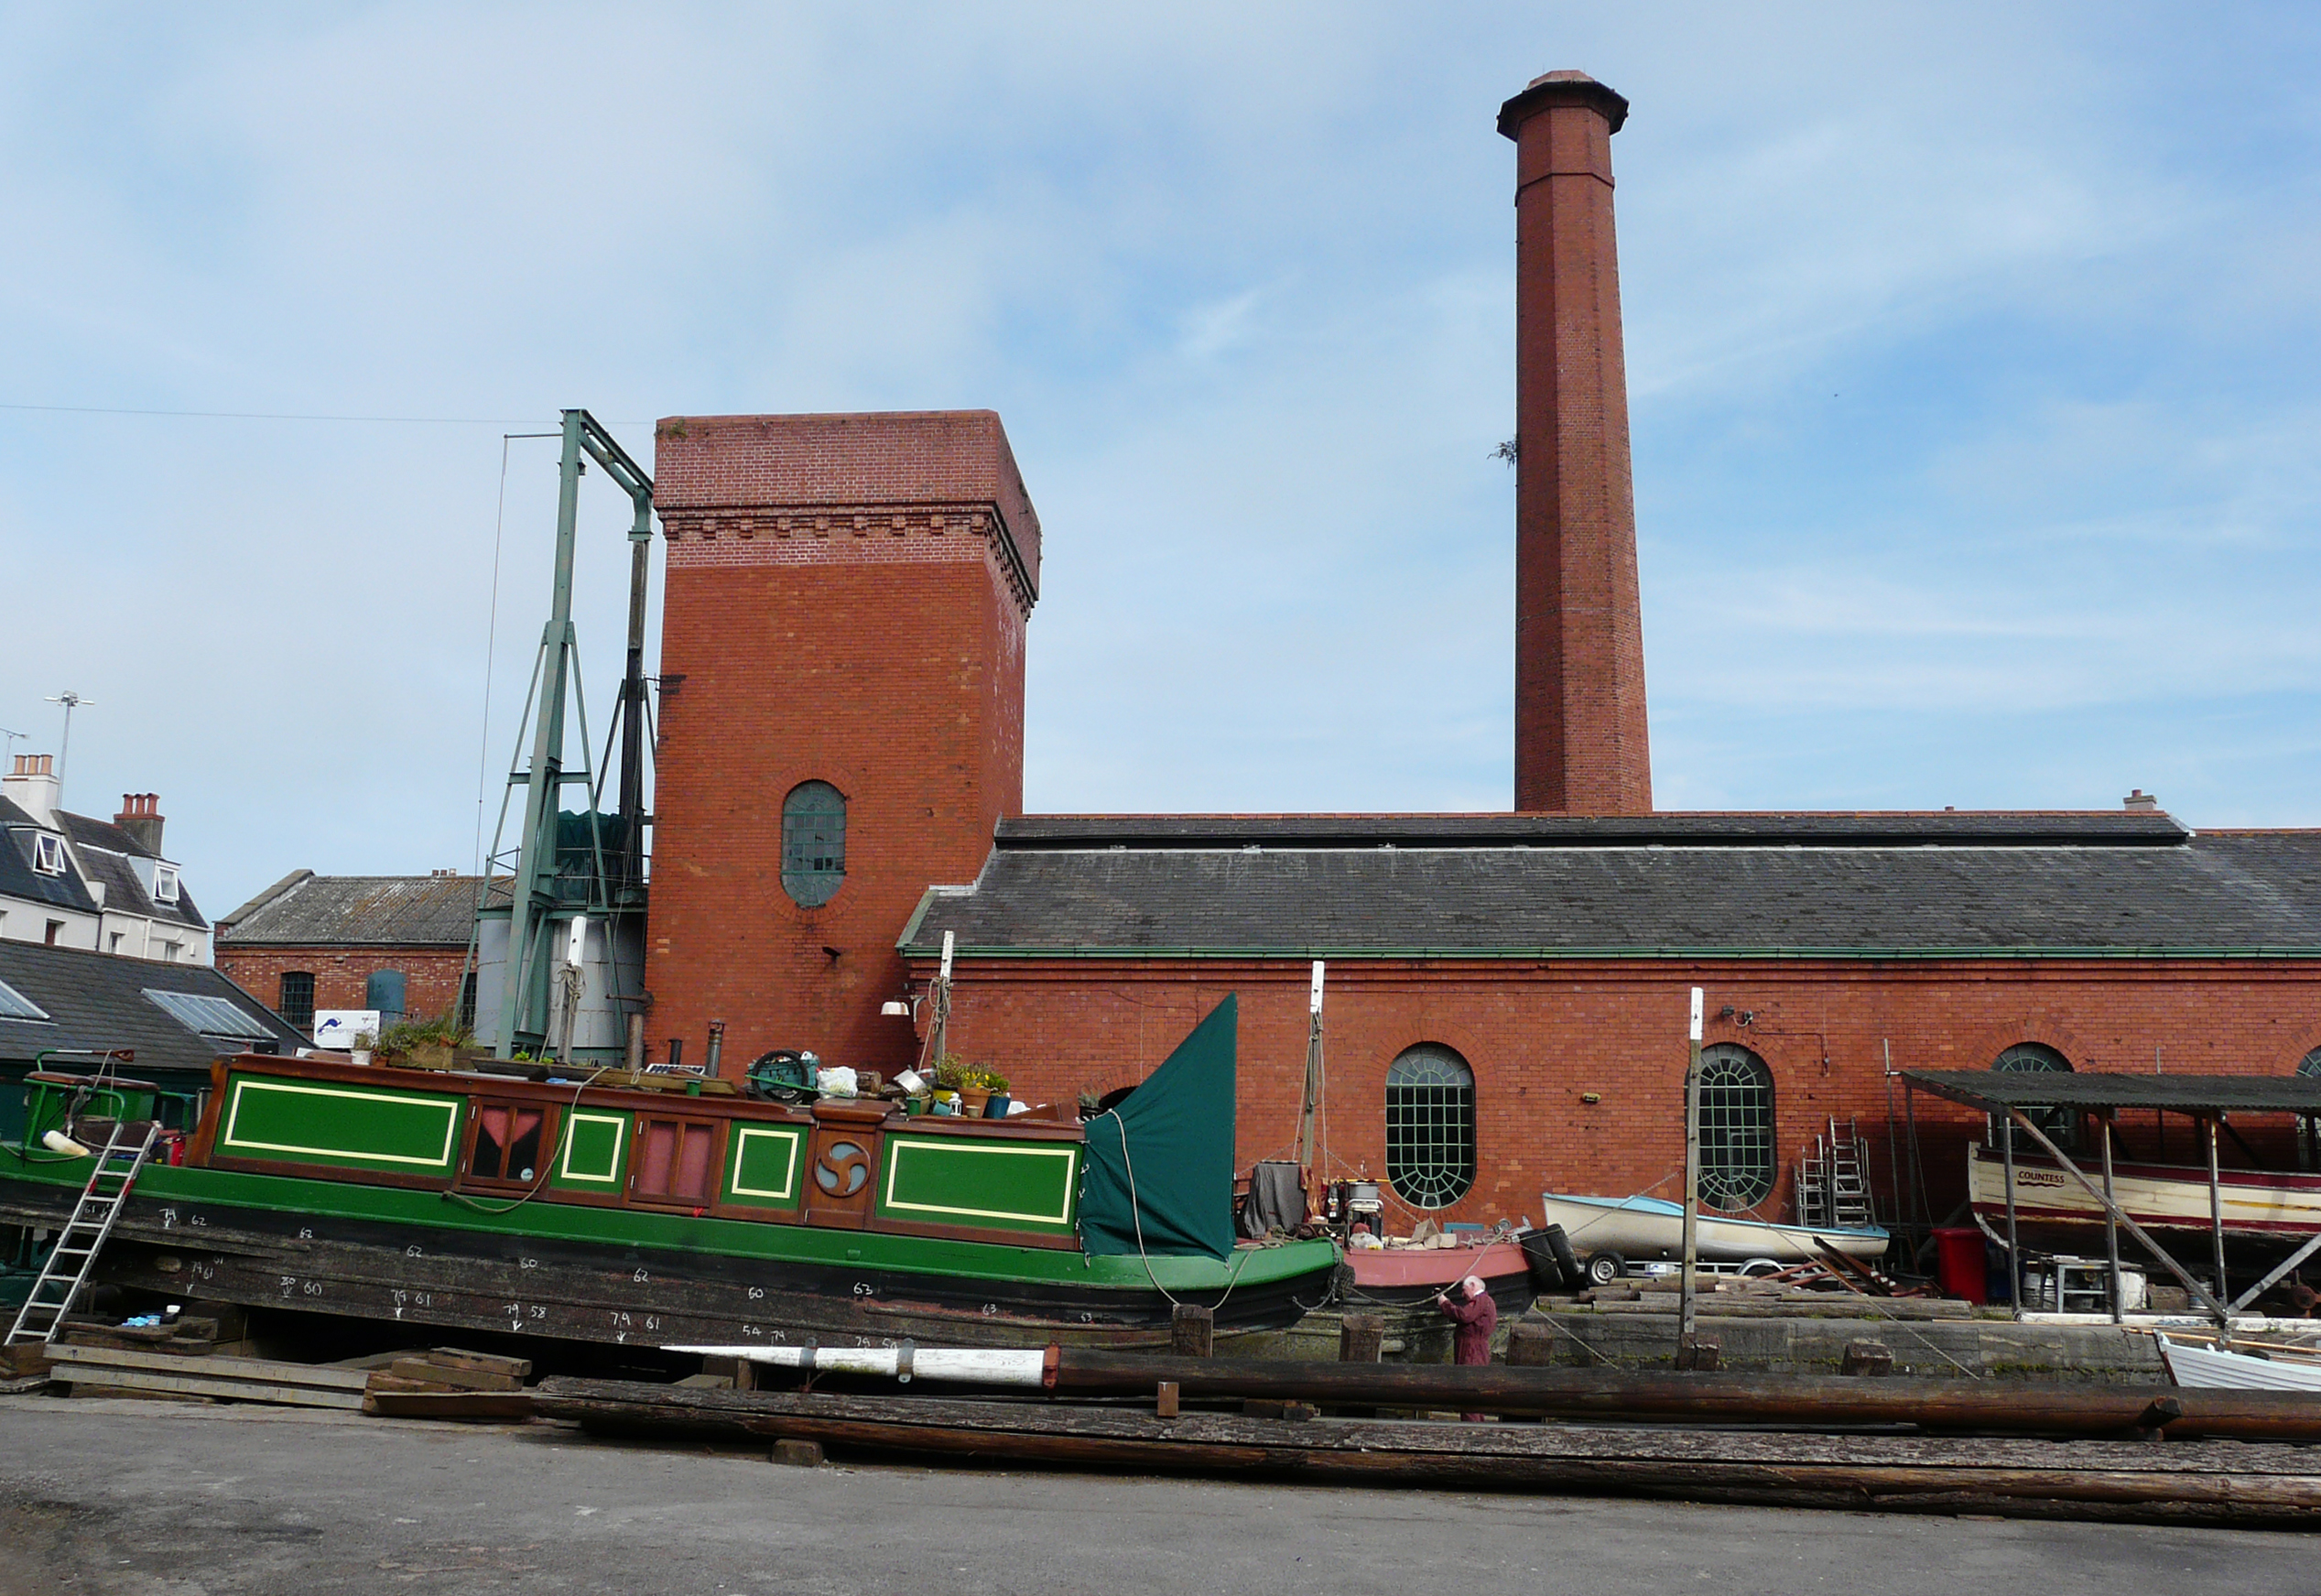 The hydraulic accumulator and engine house at Underfall Yard, with a narrow boat on the patent slip, 2014. 